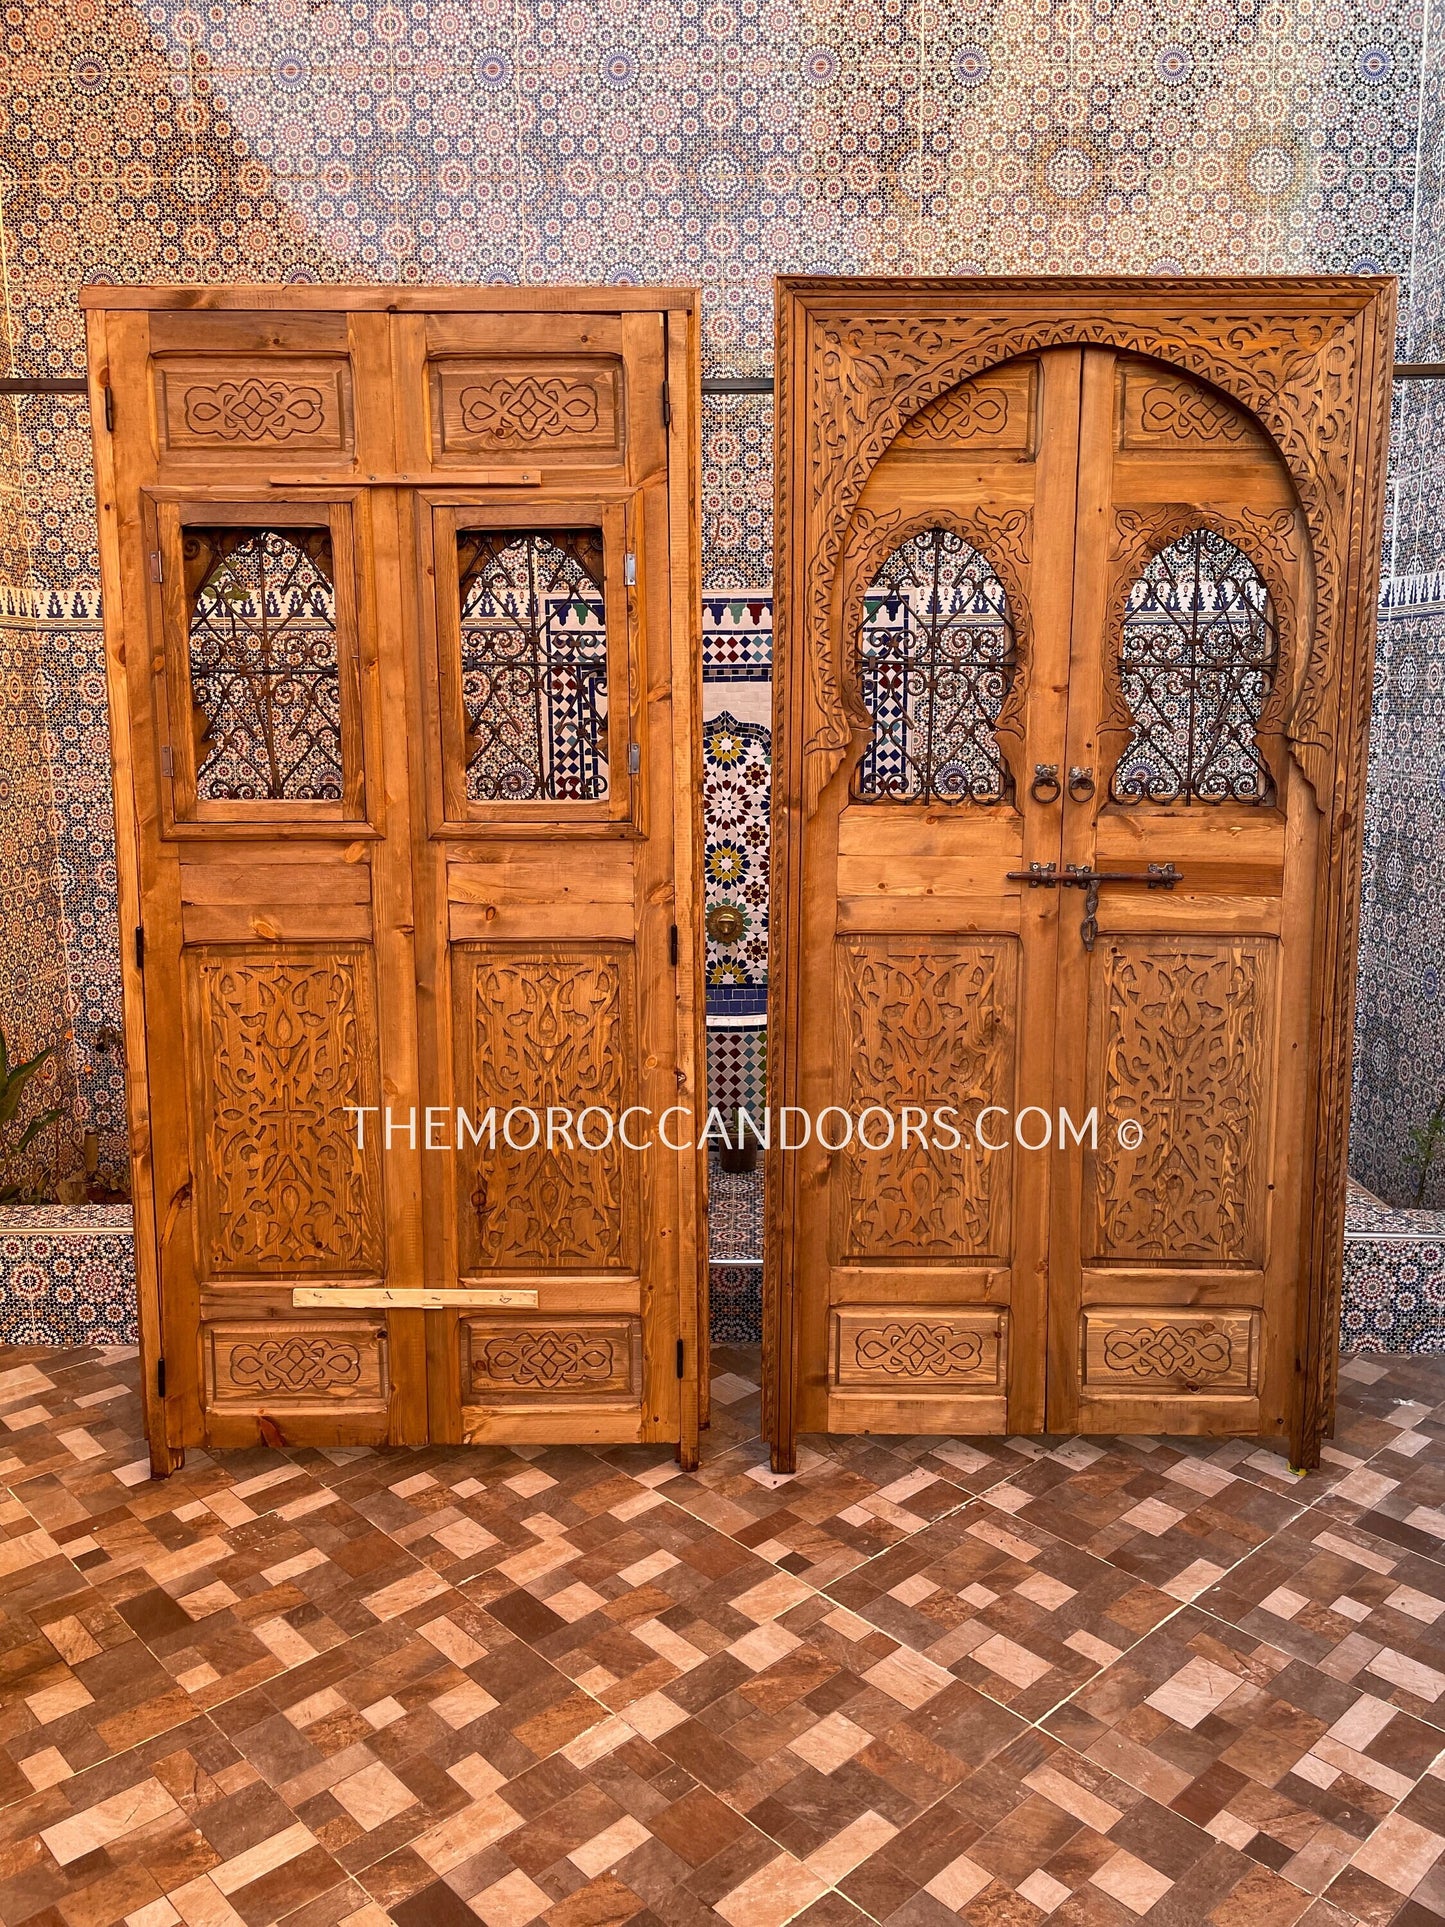 Hand Carved Wood Door with Wrought Iron Windows - A Timeless Legacy for Your Home